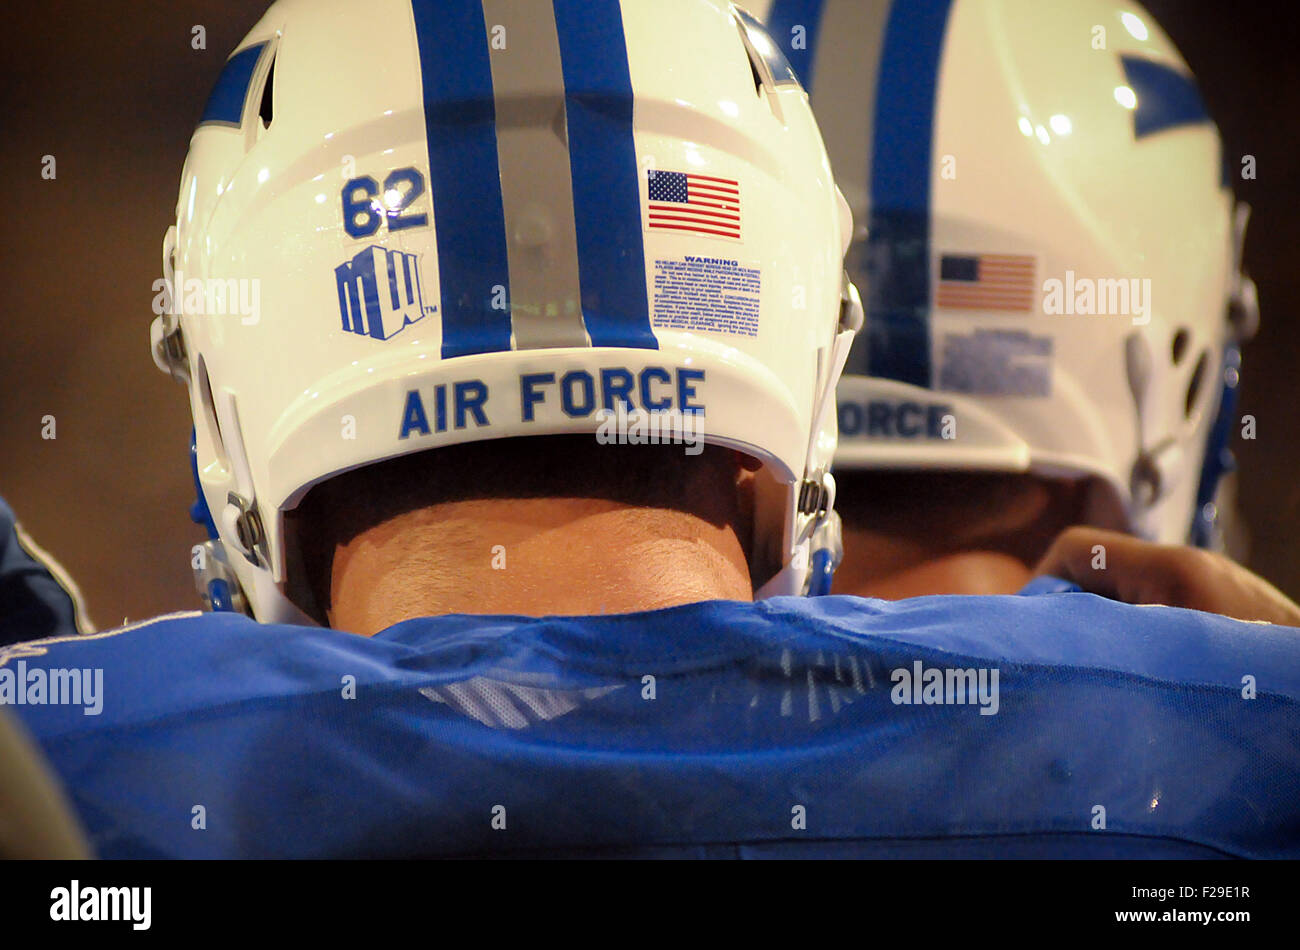 Colorado Springs, Colorado, USA. 12th Sep, 2015. Air Force players huddle prior to Mountain West Conference action between the San Jose State Spartans and the Air Force Academy Falcons at Falcon Stadium, U.S. Air Force Academy, Colorado Springs, Colorado. Air Force defeats San Jose State 37-16. © csm/Alamy Live News Stock Photo